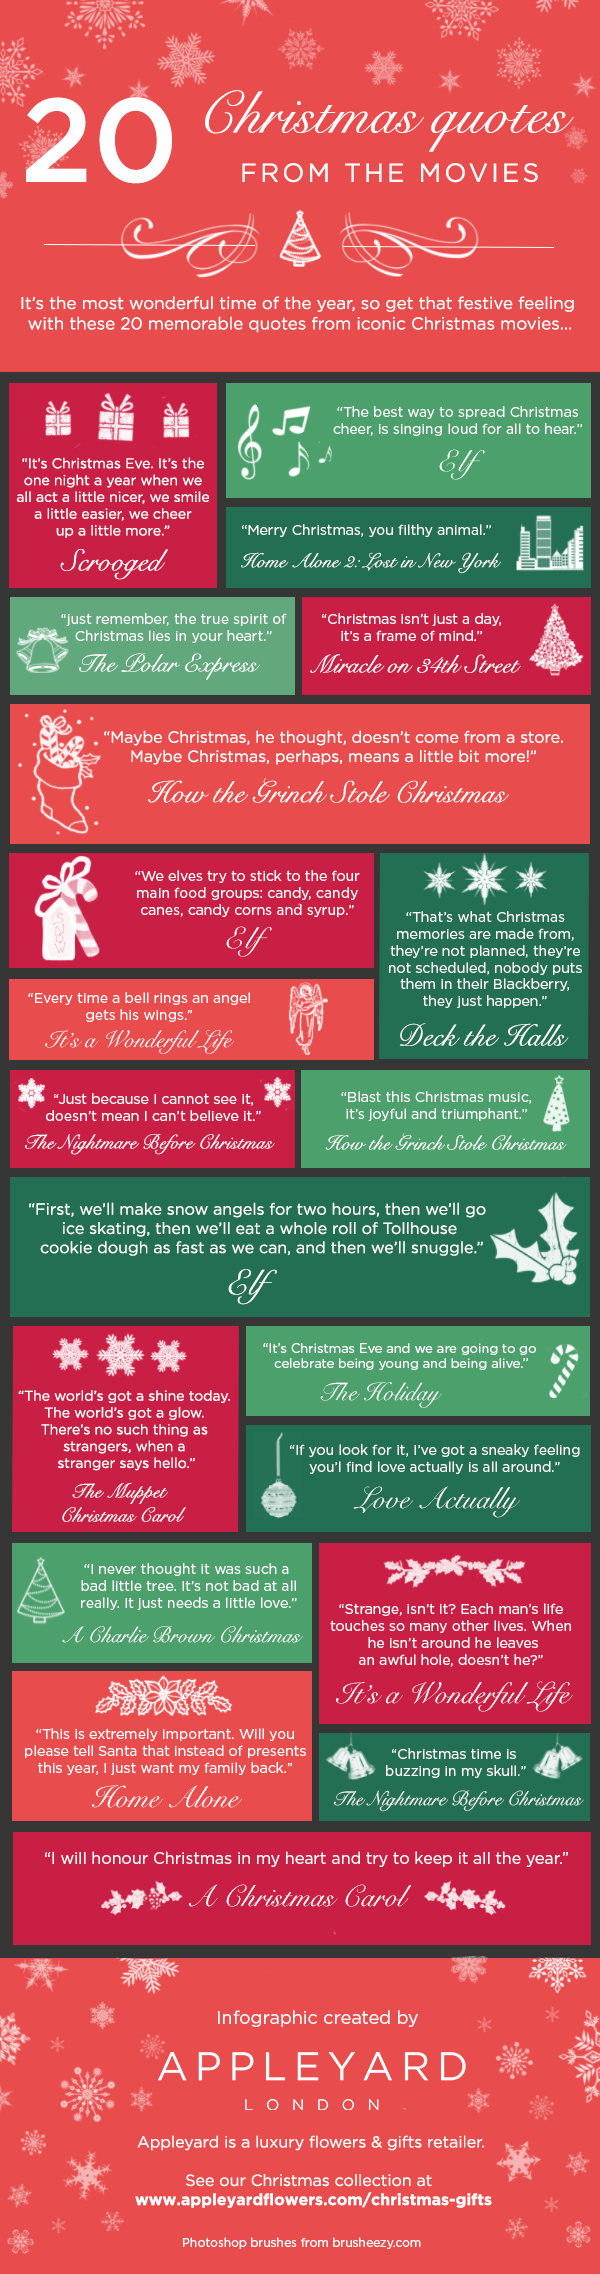 20 Memorable Christmas Quotes from the Movies [Infographic] - Appleyard  London